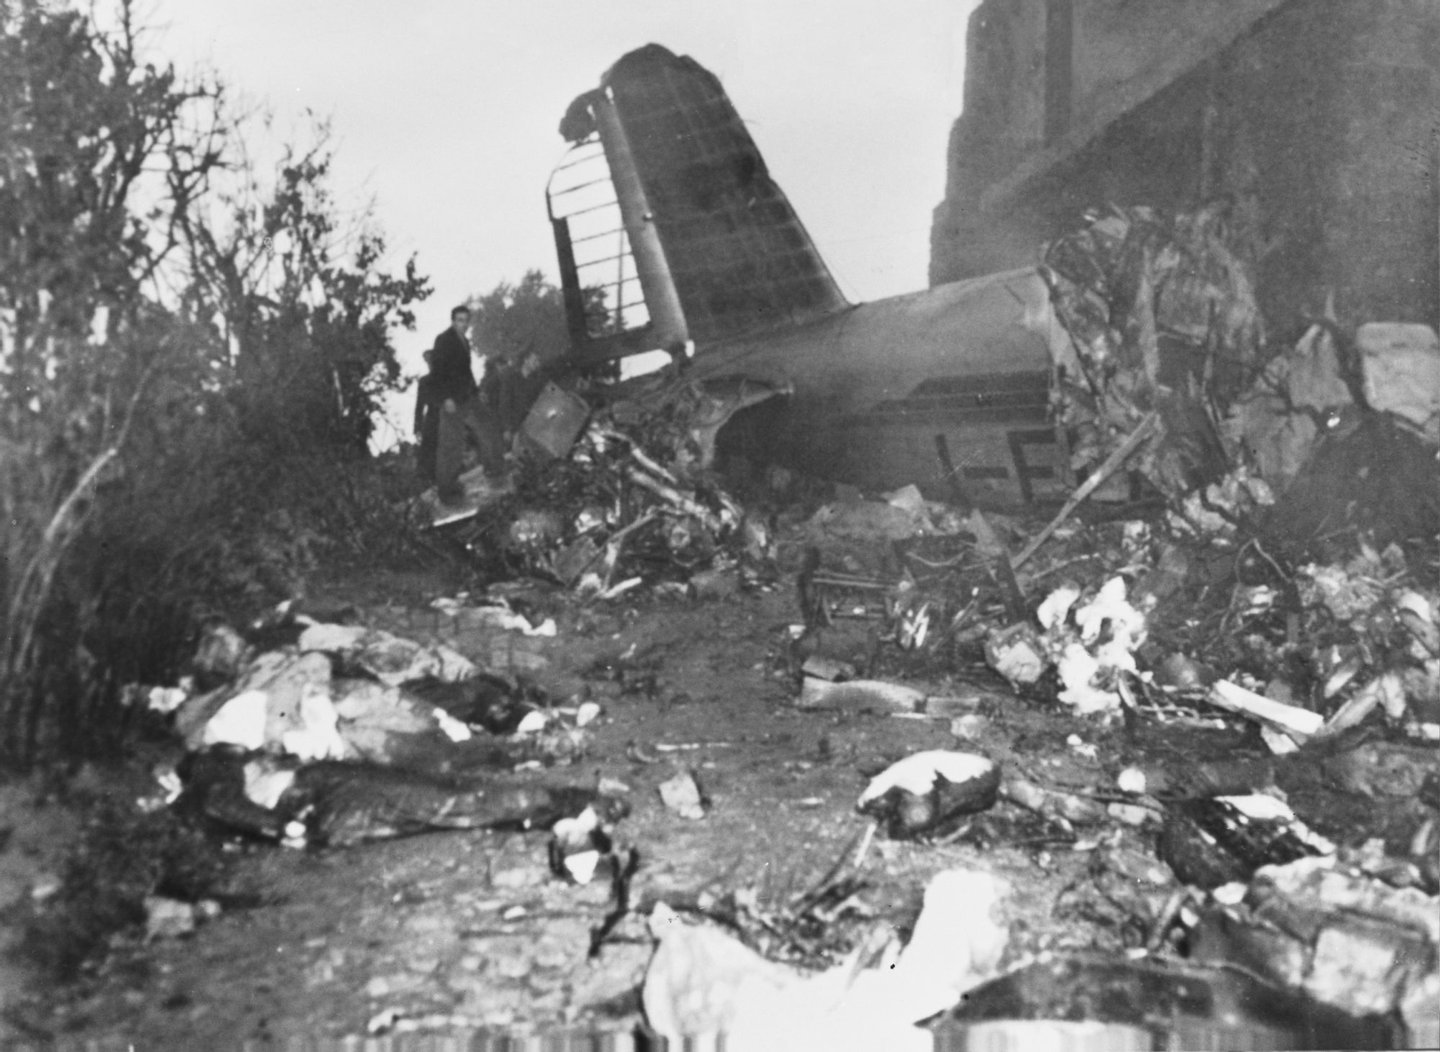 Some of the victims of the air crash in which Italian football team Torino FC were killed, along with their British trainer Leslie Lievesley, 5th May 1949. The plane, which had taken off in Lisbon, was circling to land in Turin when it crashed into Superga hill. The death toll equalled 31, including the entire team, five reserves, two trainers, three journalist, the club's manager Arnaldo Agnisetta, a masseur and the crew of the aircraft. (Photo by Keystone/Hulton Archive/Getty Images)